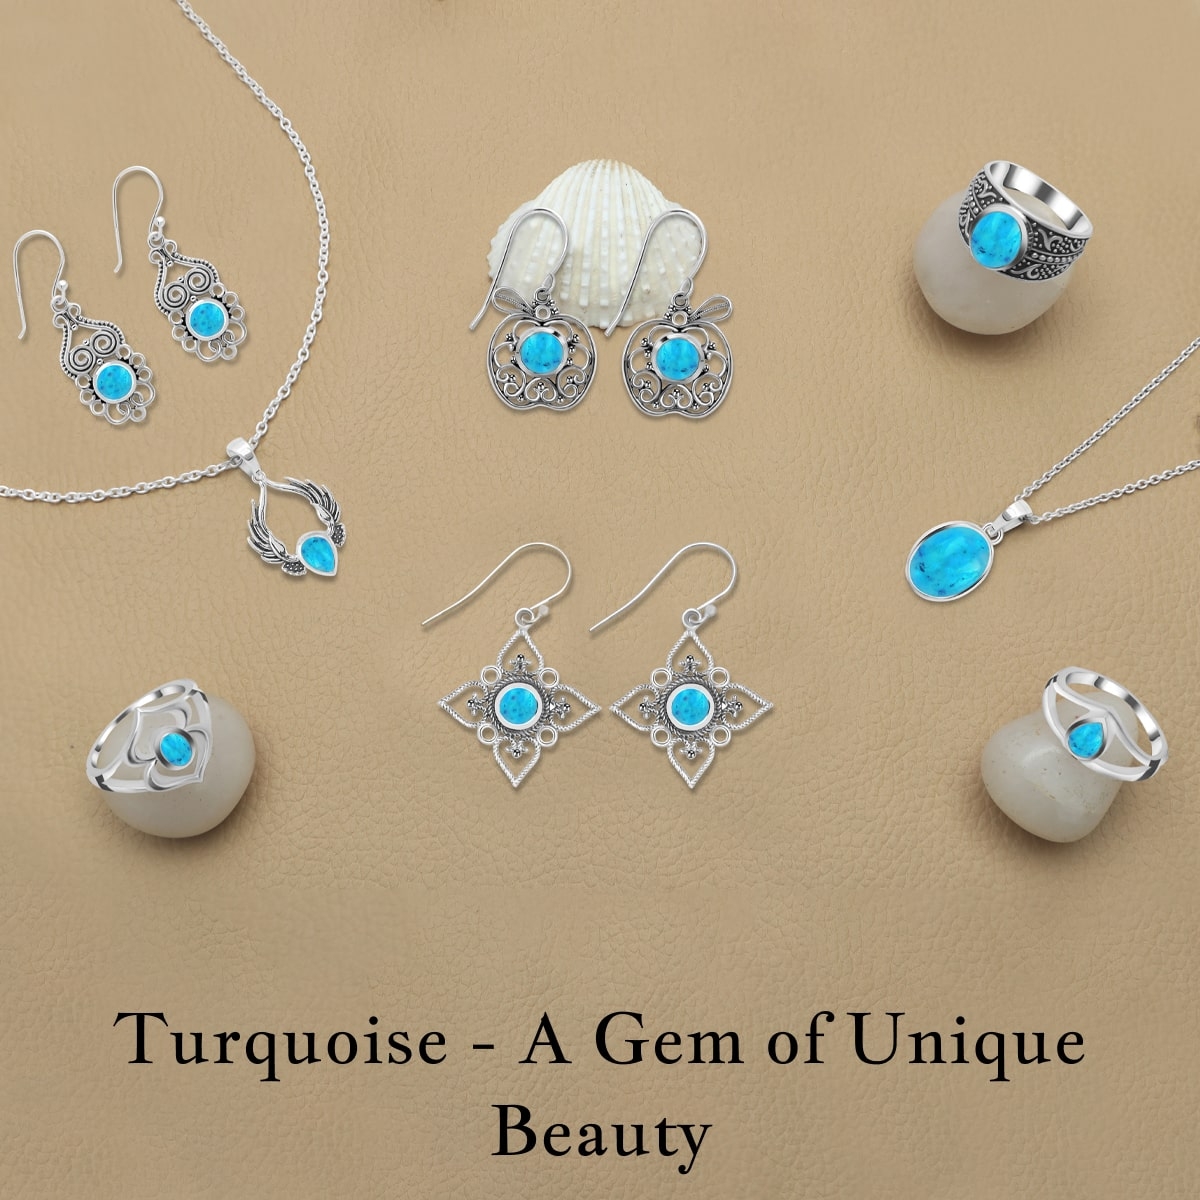 What is Turquoise